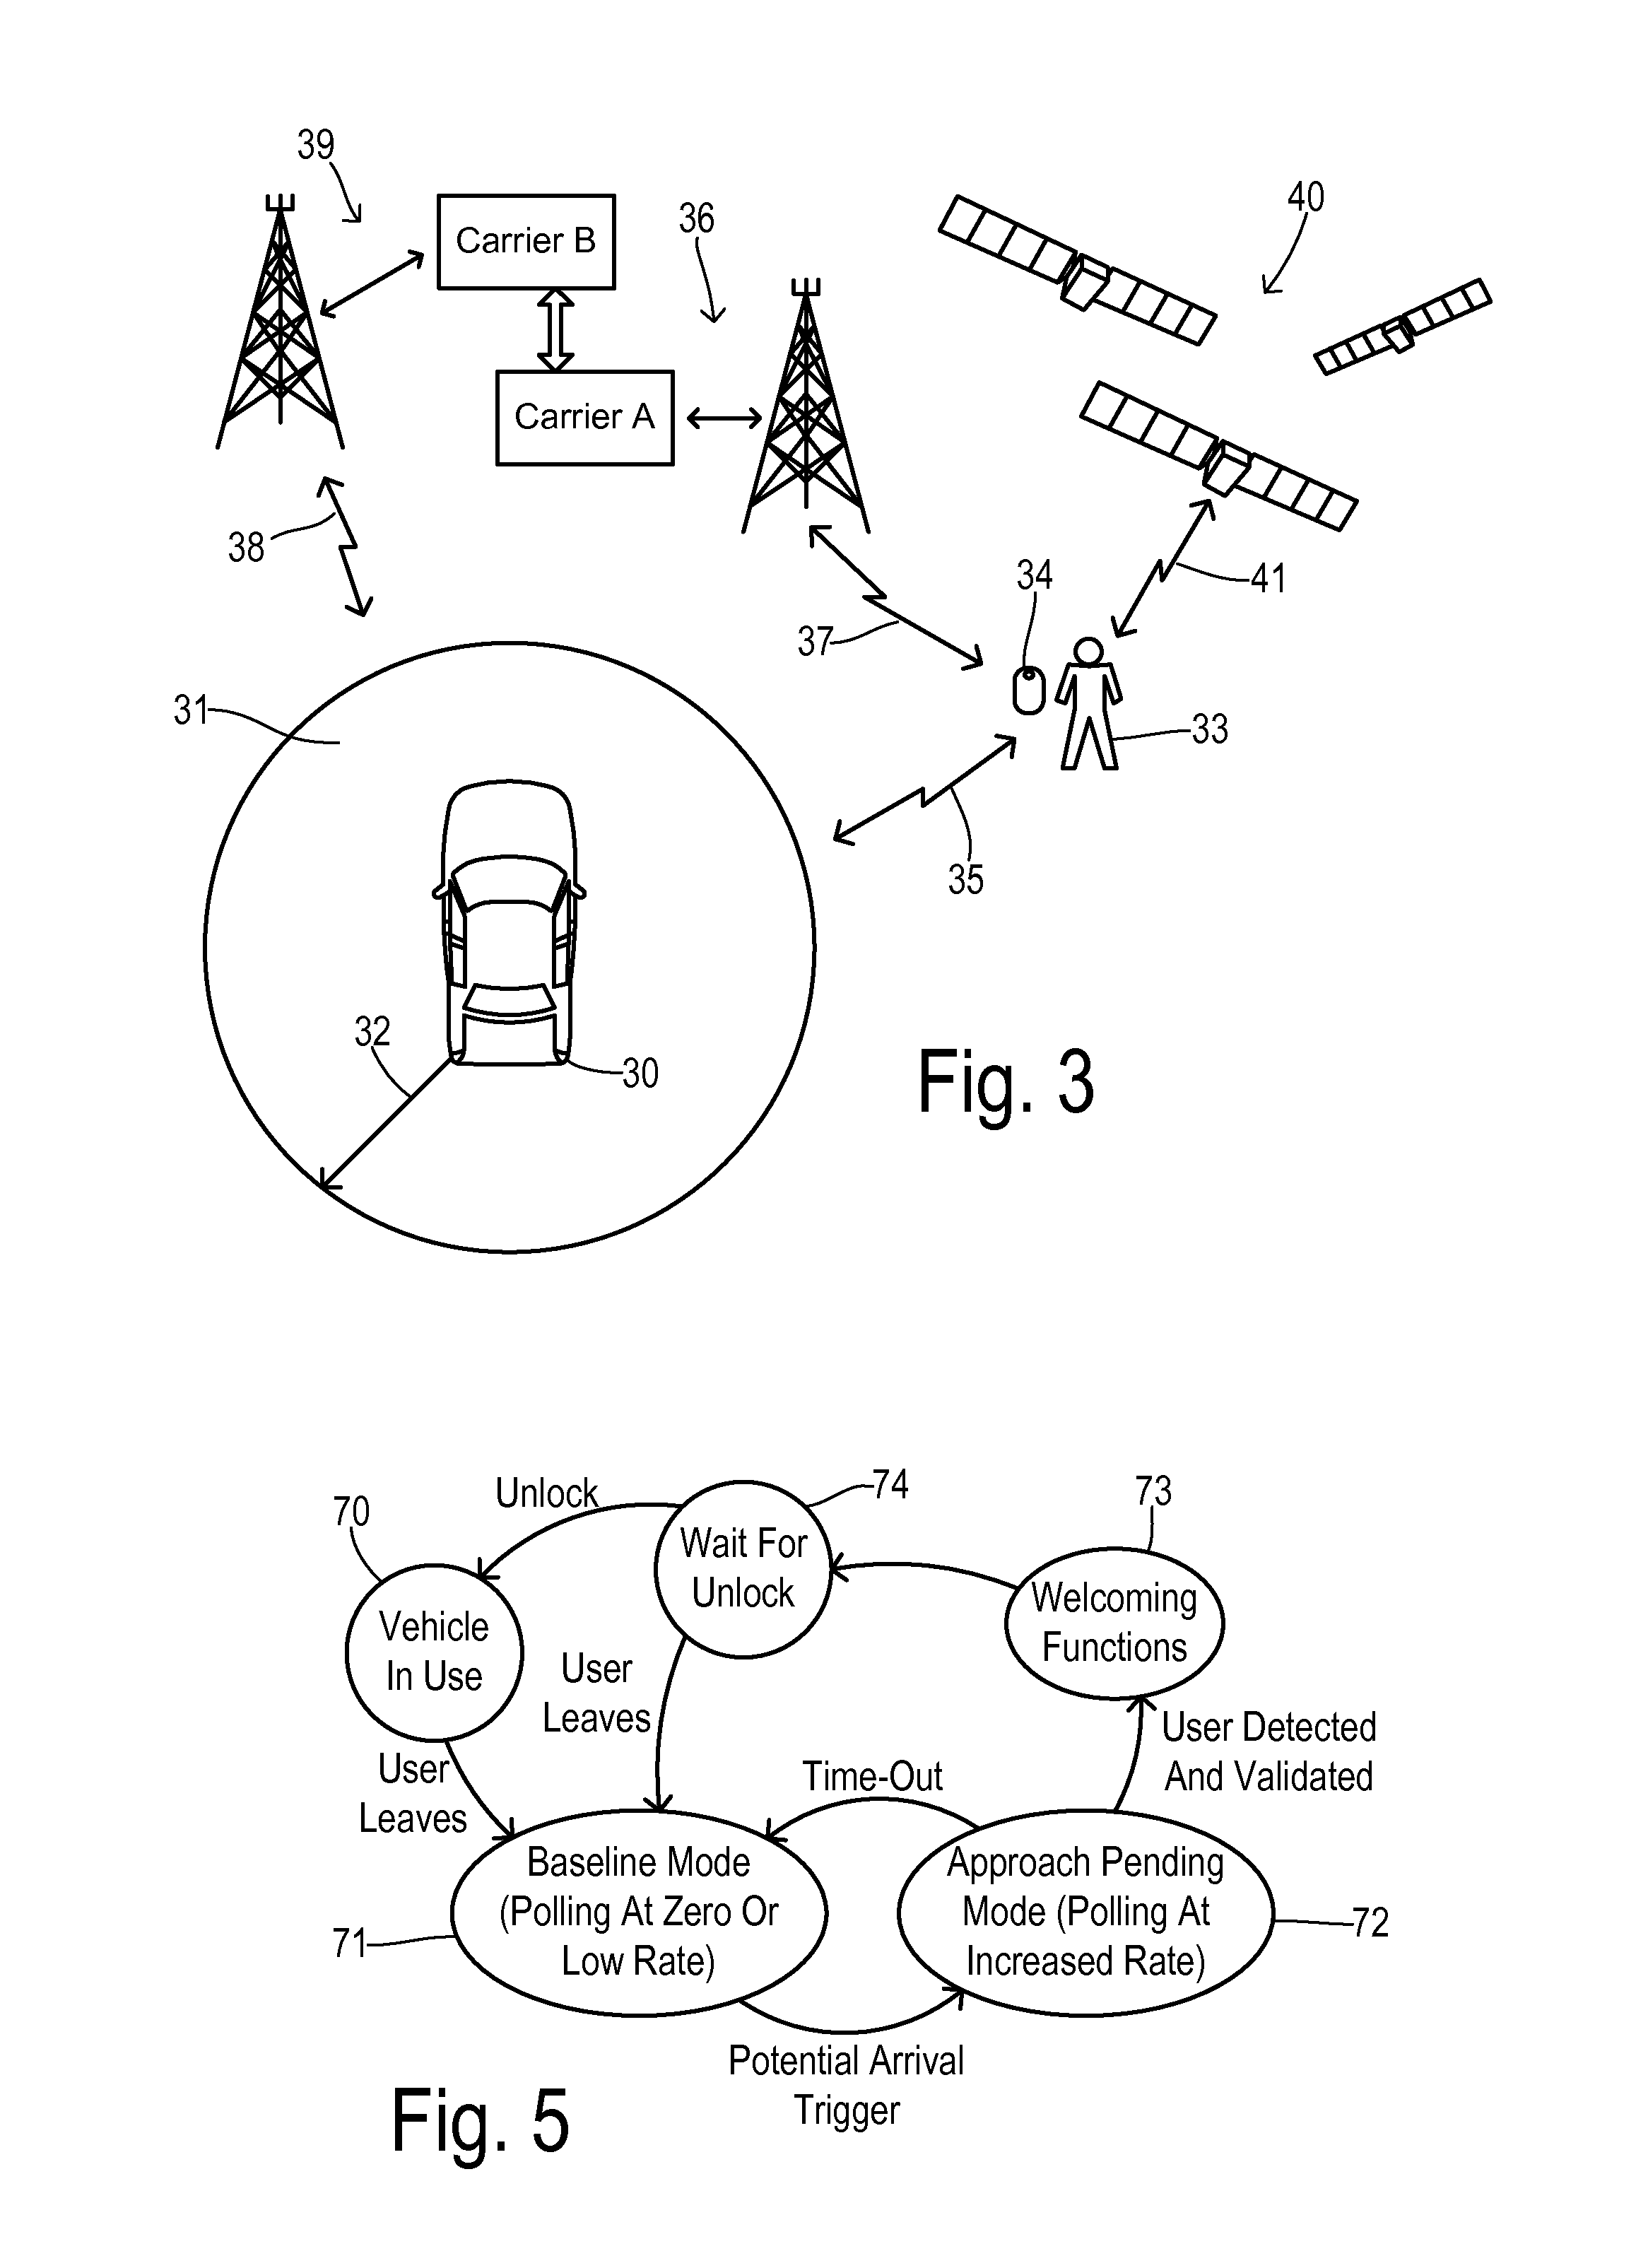 User proximity detection for activating vehicle convenience functions